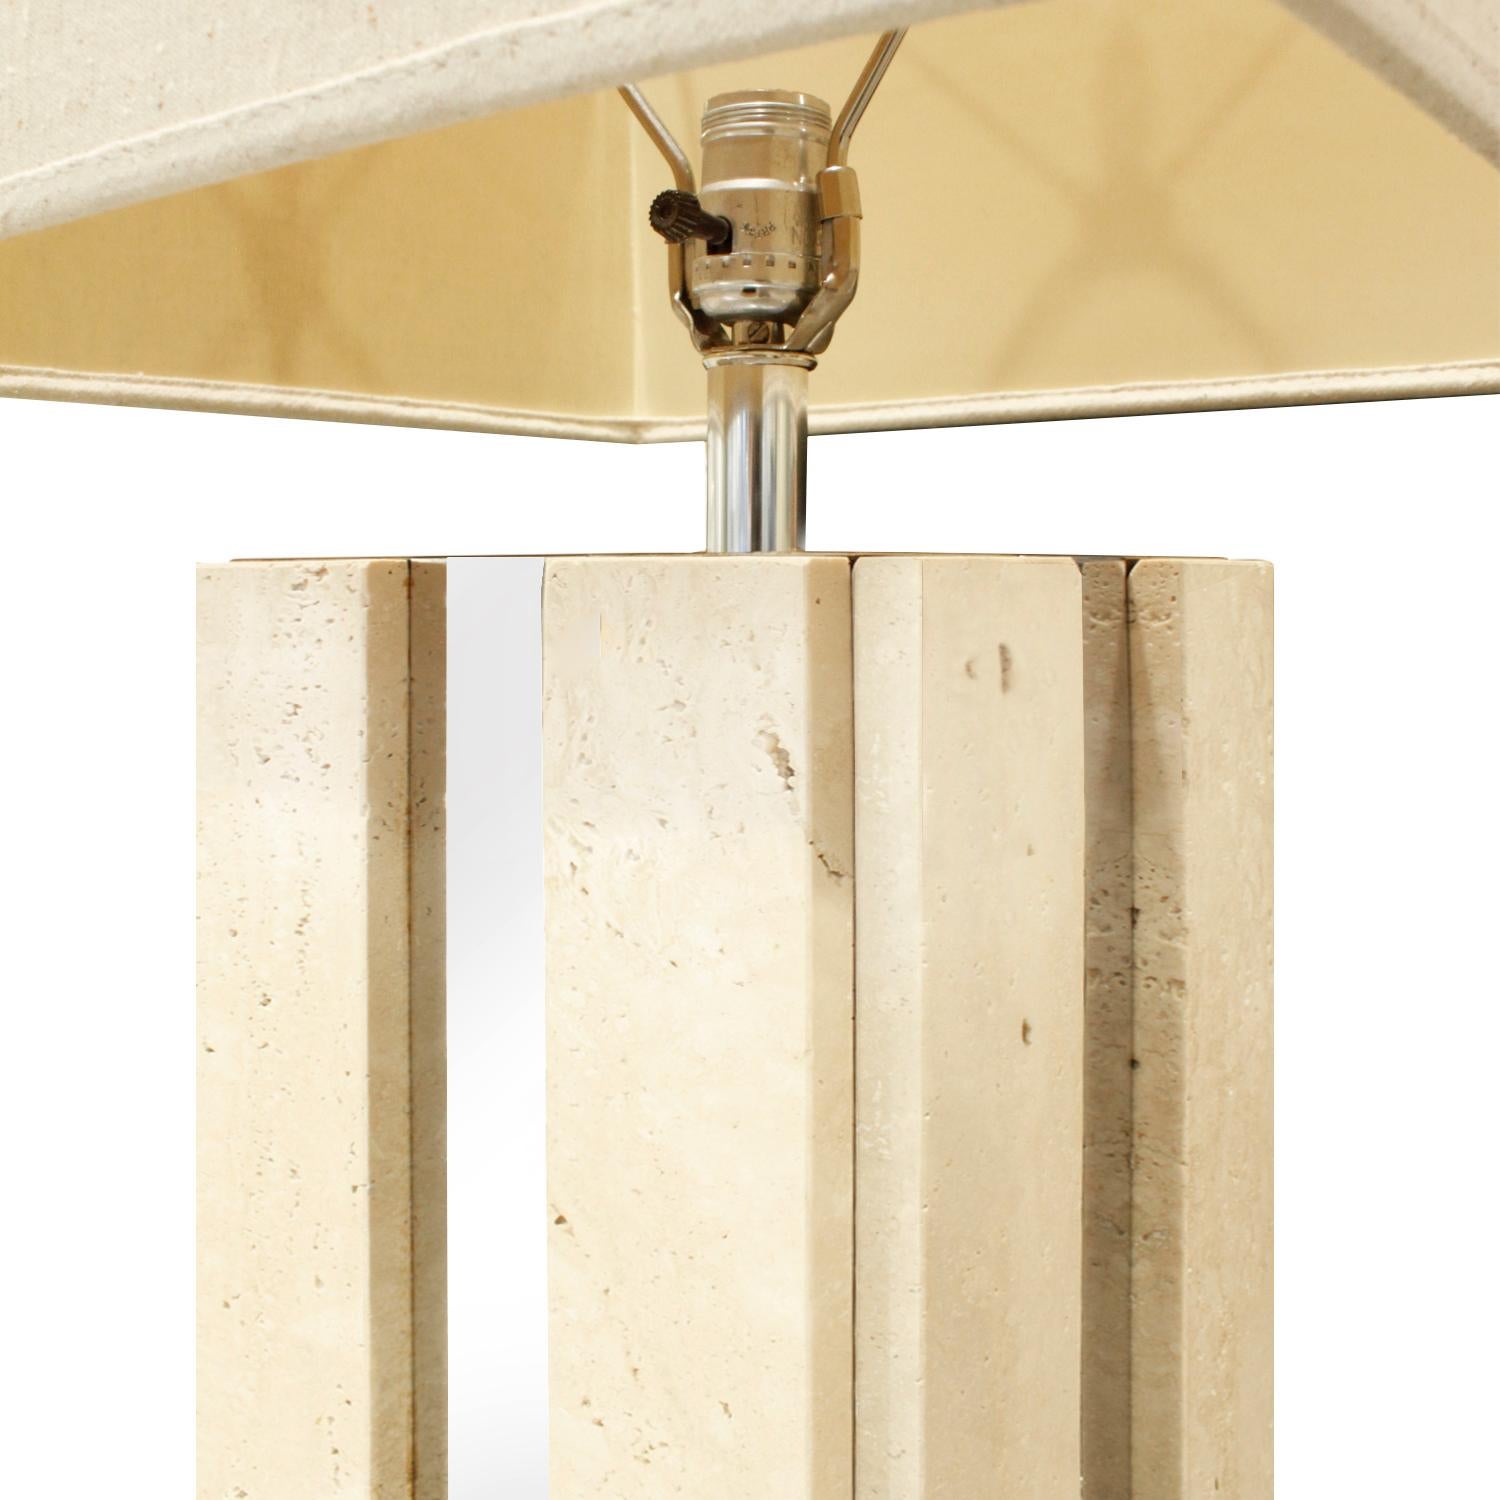 Mid-20th Century Exceptional Traventine Table Lamp with Chrome Accents, 1960s For Sale